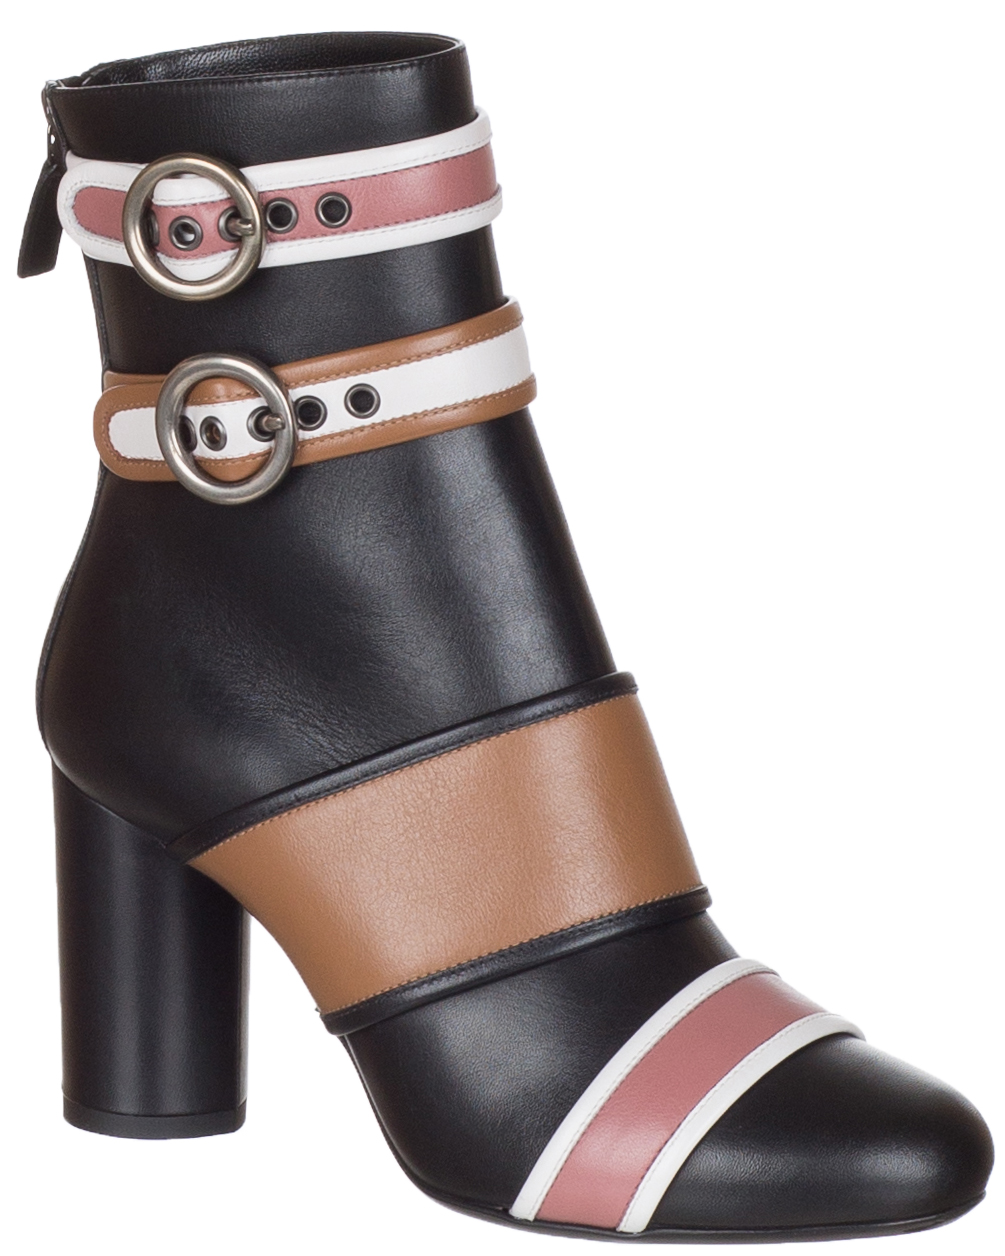 woocommerce-673321-2209615.cloudwaysapps.com-lanvin-womens-black-nappa-leather-colorblock-ankle-boots-shoes